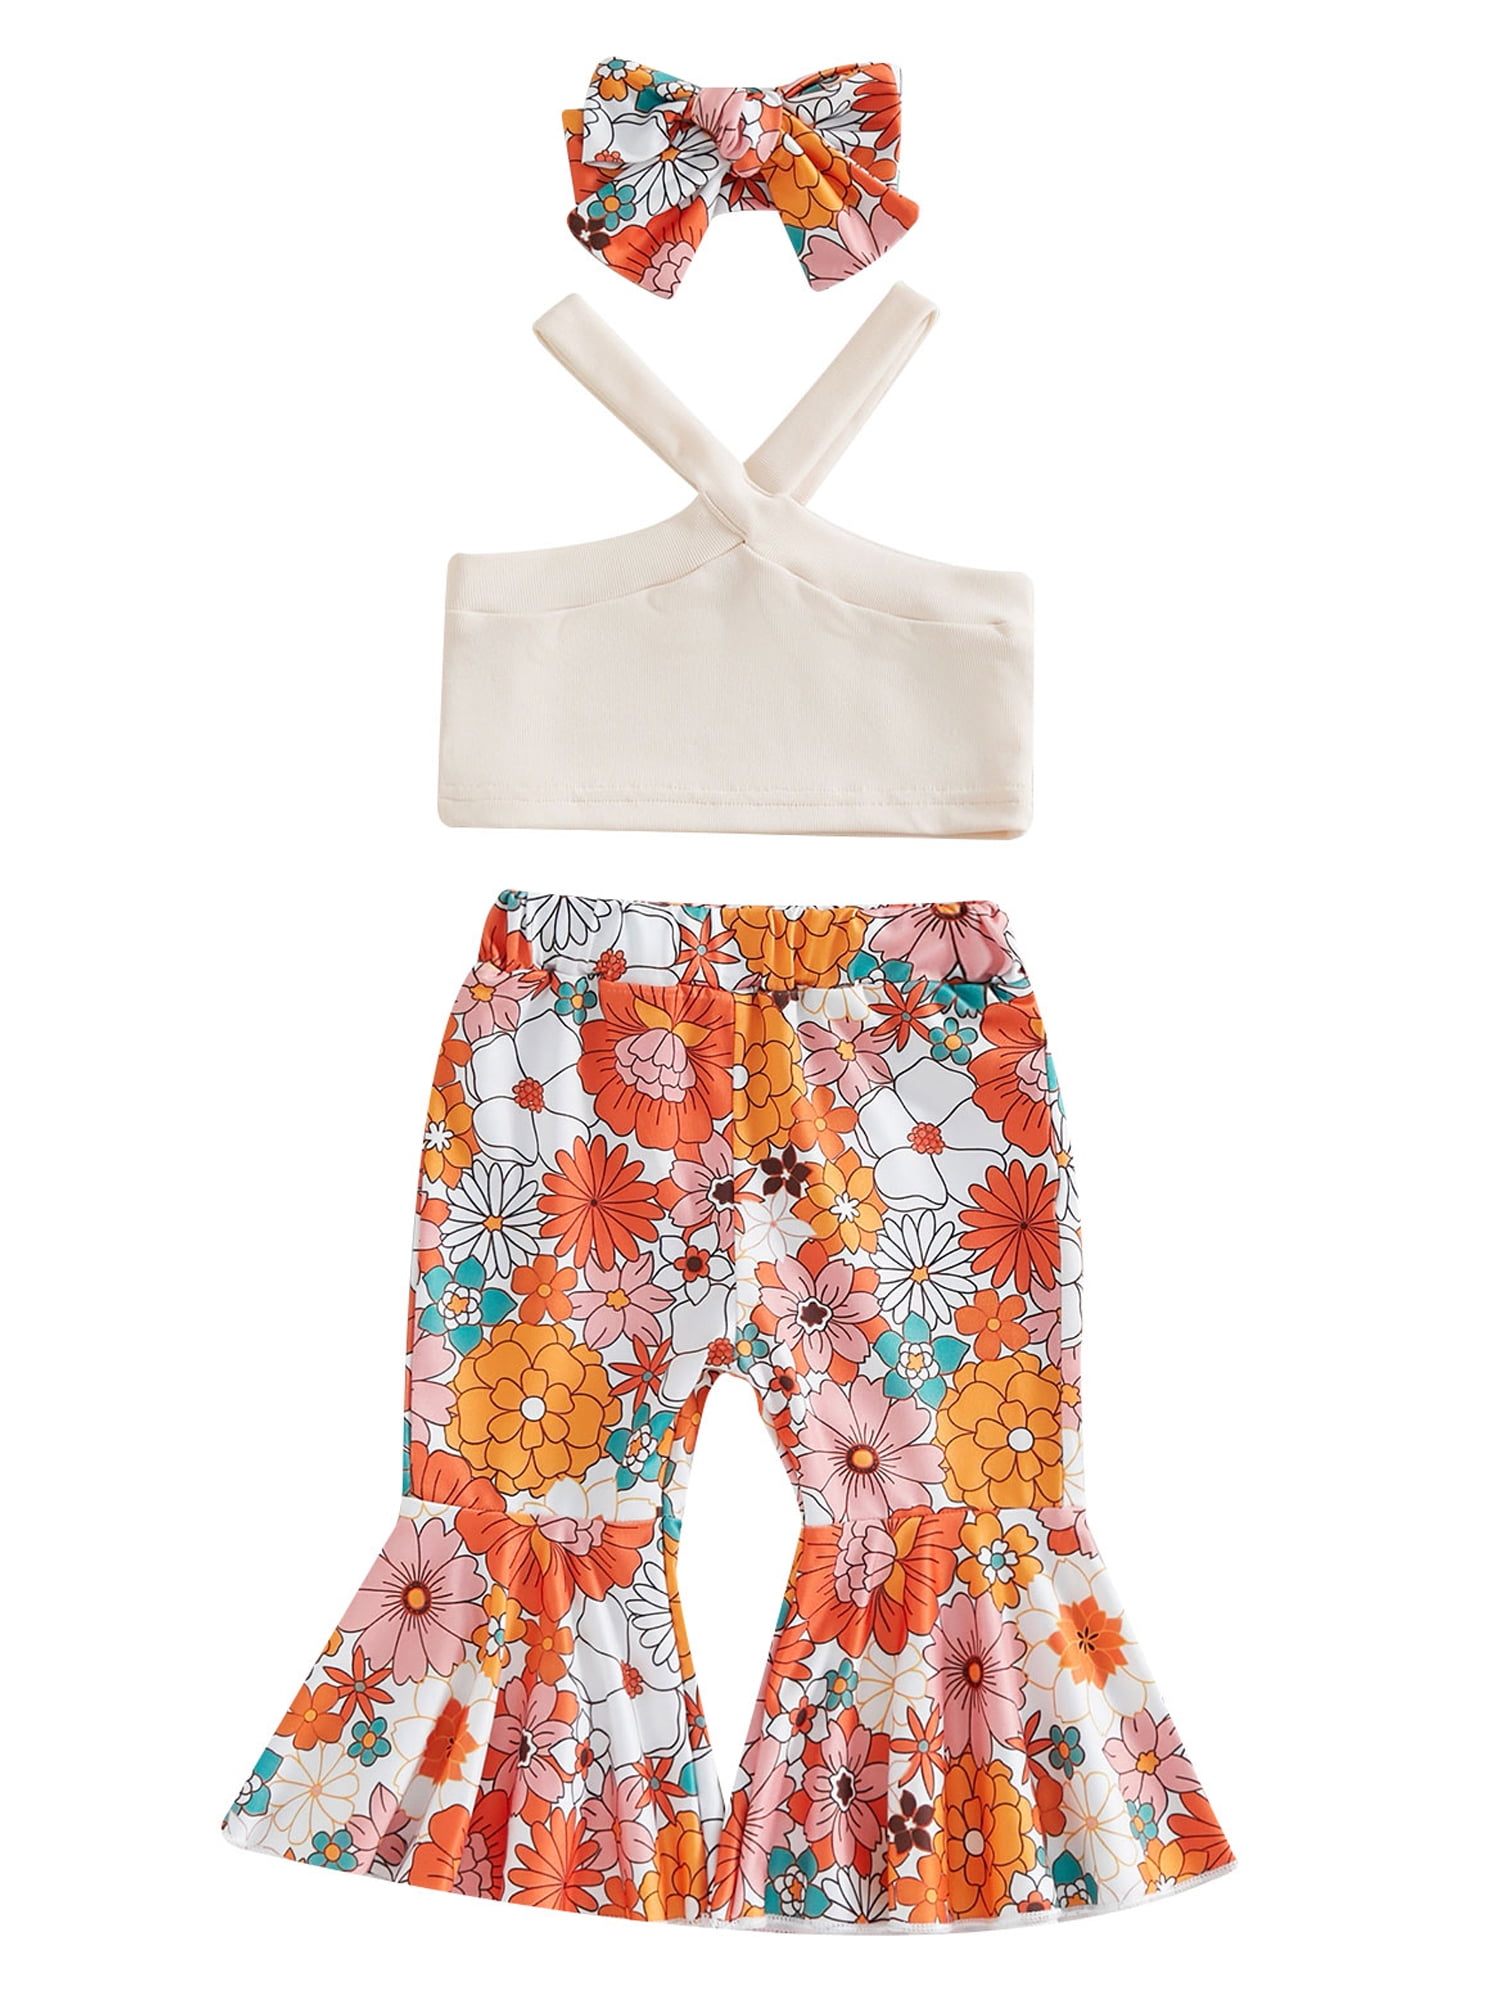 Toddler Baby Girls Groovy Outfit Cross Straps Tank Top and Floral Bell  Bottom Pants Outfit Set Summer Clothes